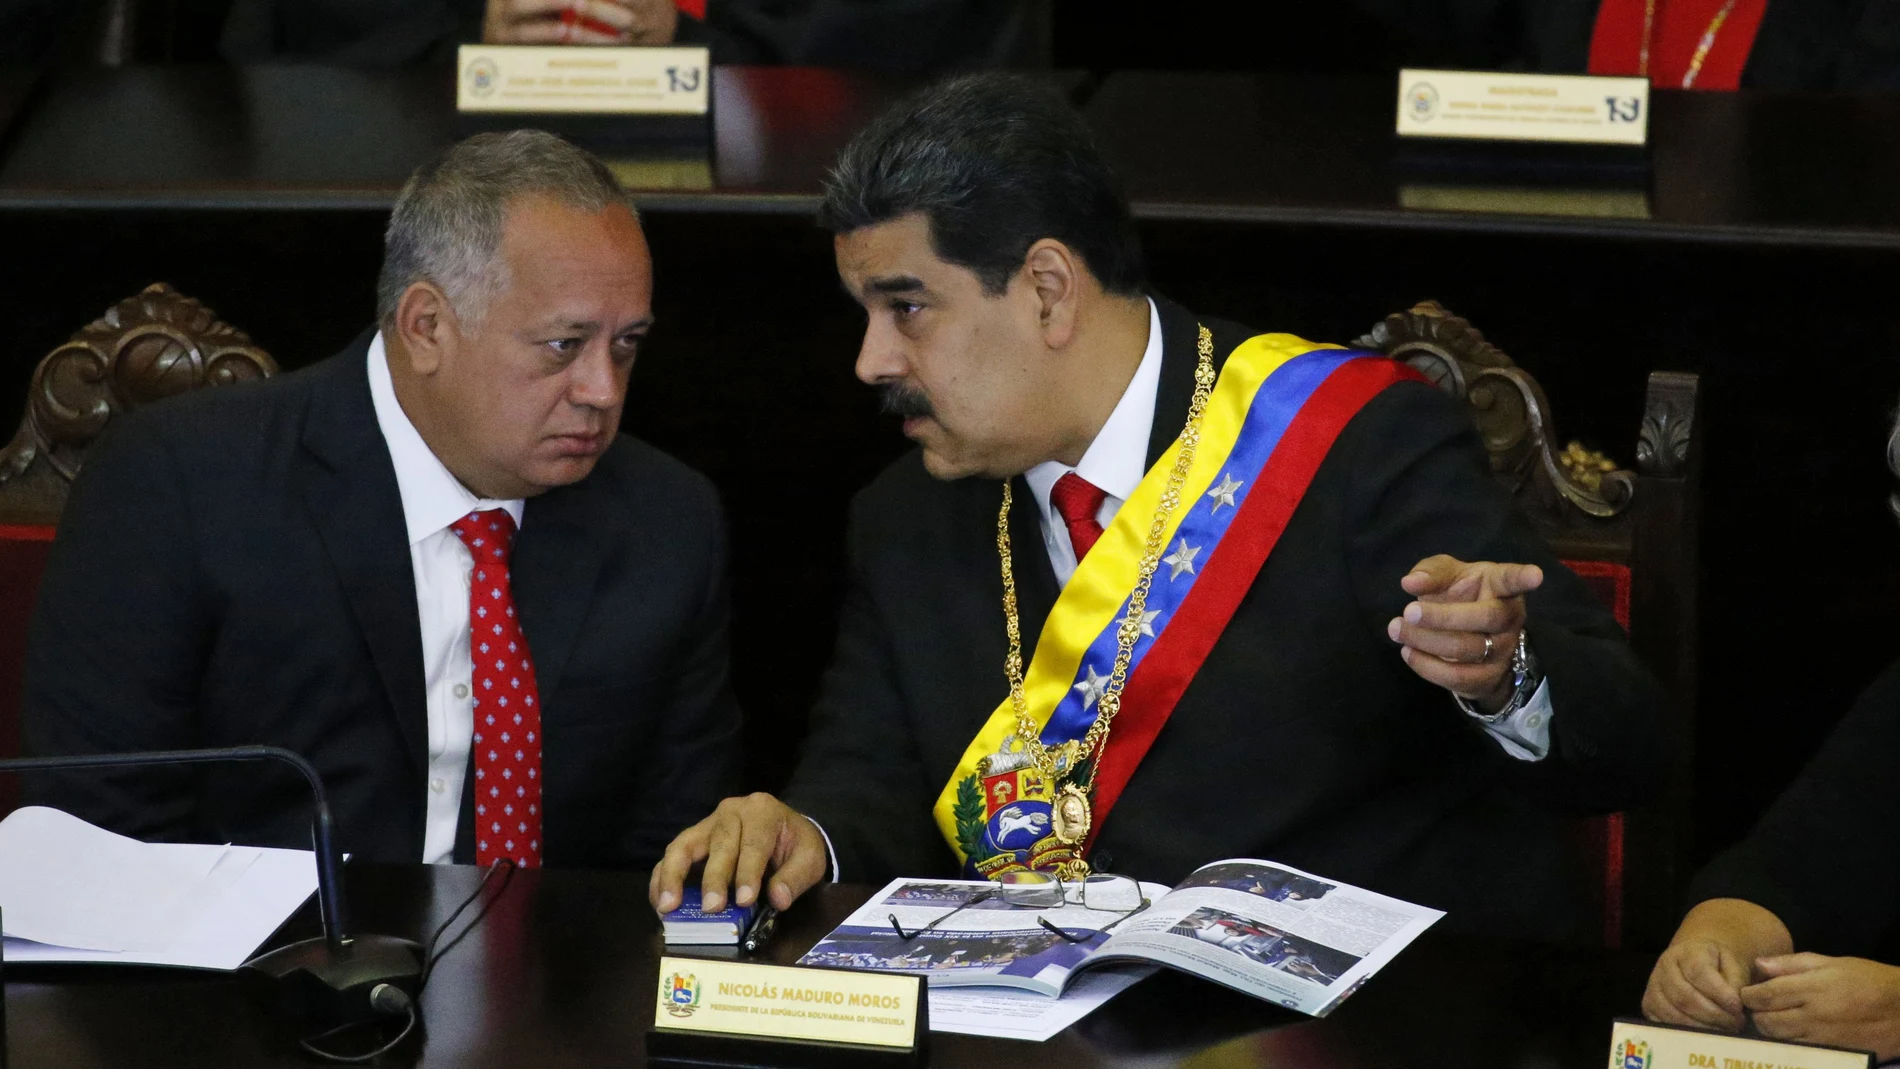 FILE - In this Jan. 24, 2019 file photo, Venezuelan President Nicolas Maduro, right, speaks with Constitutional Assembly President Diosdado Cabello at the Supreme Court during an annual ceremony that marks the start of the judicial year in Caracas, Venezuela. On Thursday, March 26, 2020, the U.S. Justice Department made public it has charged in several indictments against Maduro and his inner circle, including Cabello, that the leader has effectively converted Venezuela into a criminal enterprise at the service of drug traffickers and terrorist groups as he and his allies stole billions from the South American country. (AP Photo/Ariana Cubillos, File)